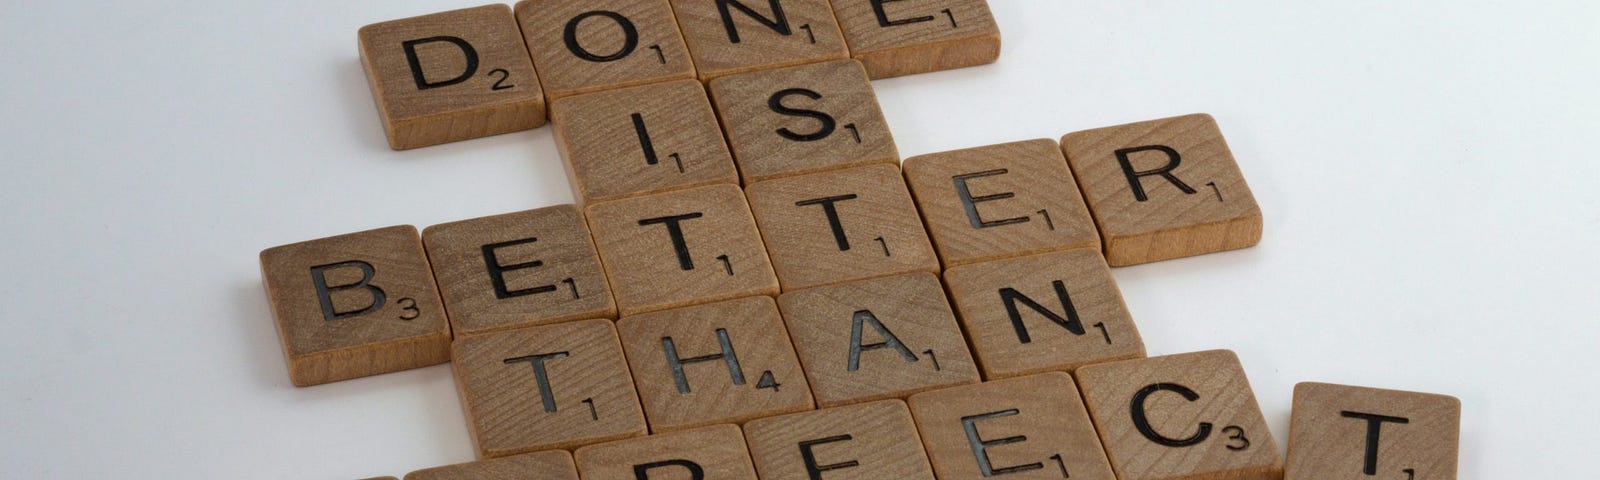 scrabble stones for article First Get to Good, Then Get to Better